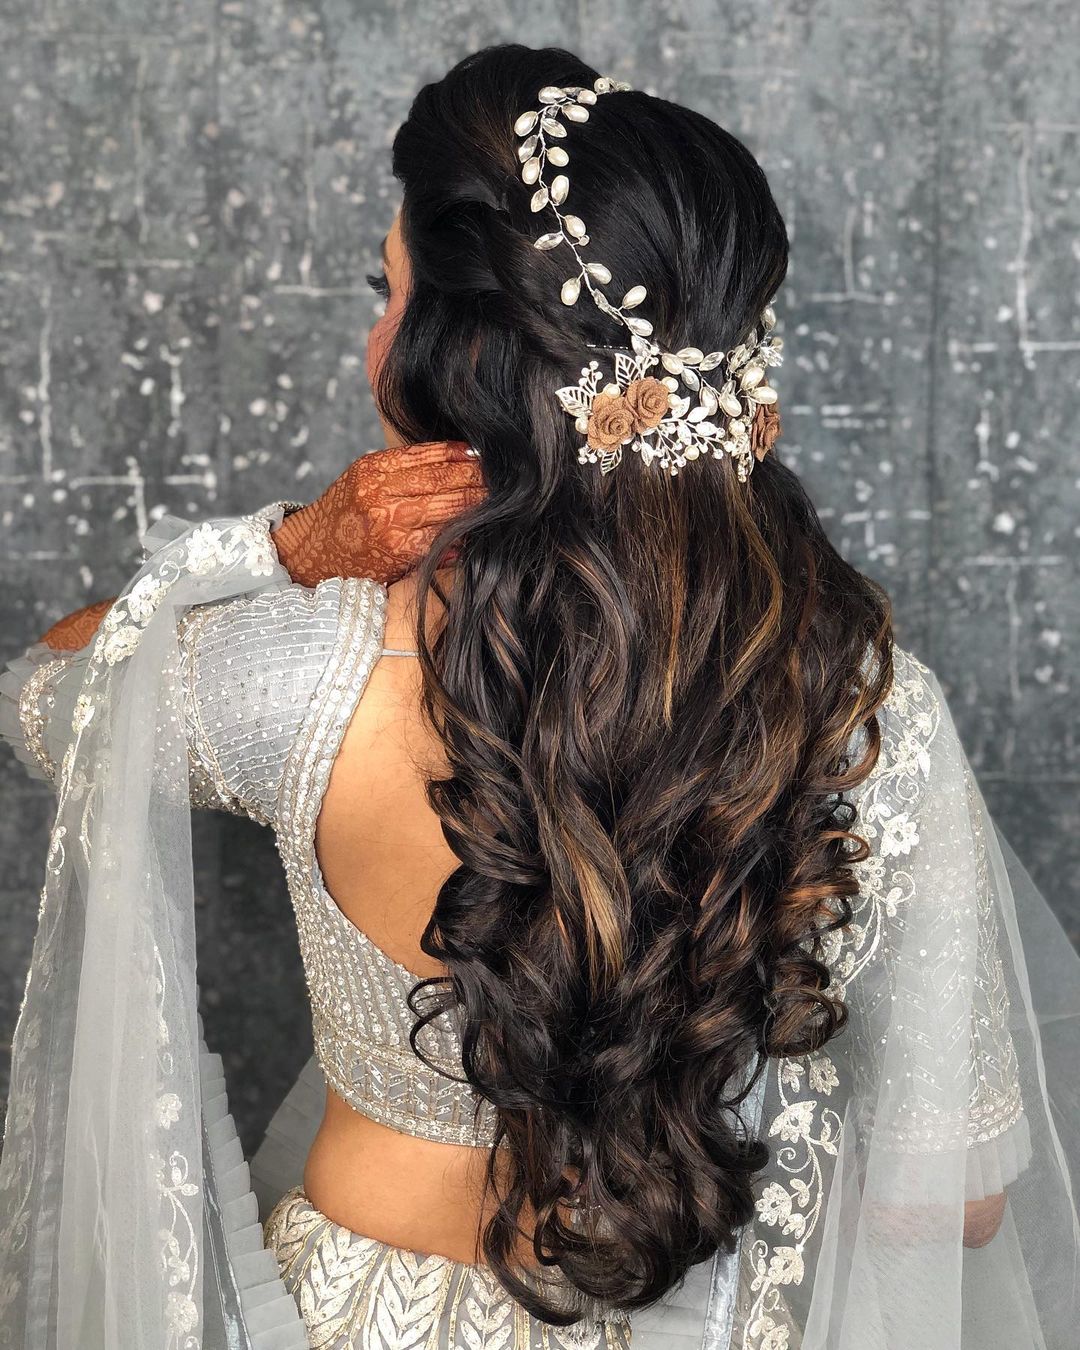 Pin on 37+ Best Bridal Hairstyles of 2020